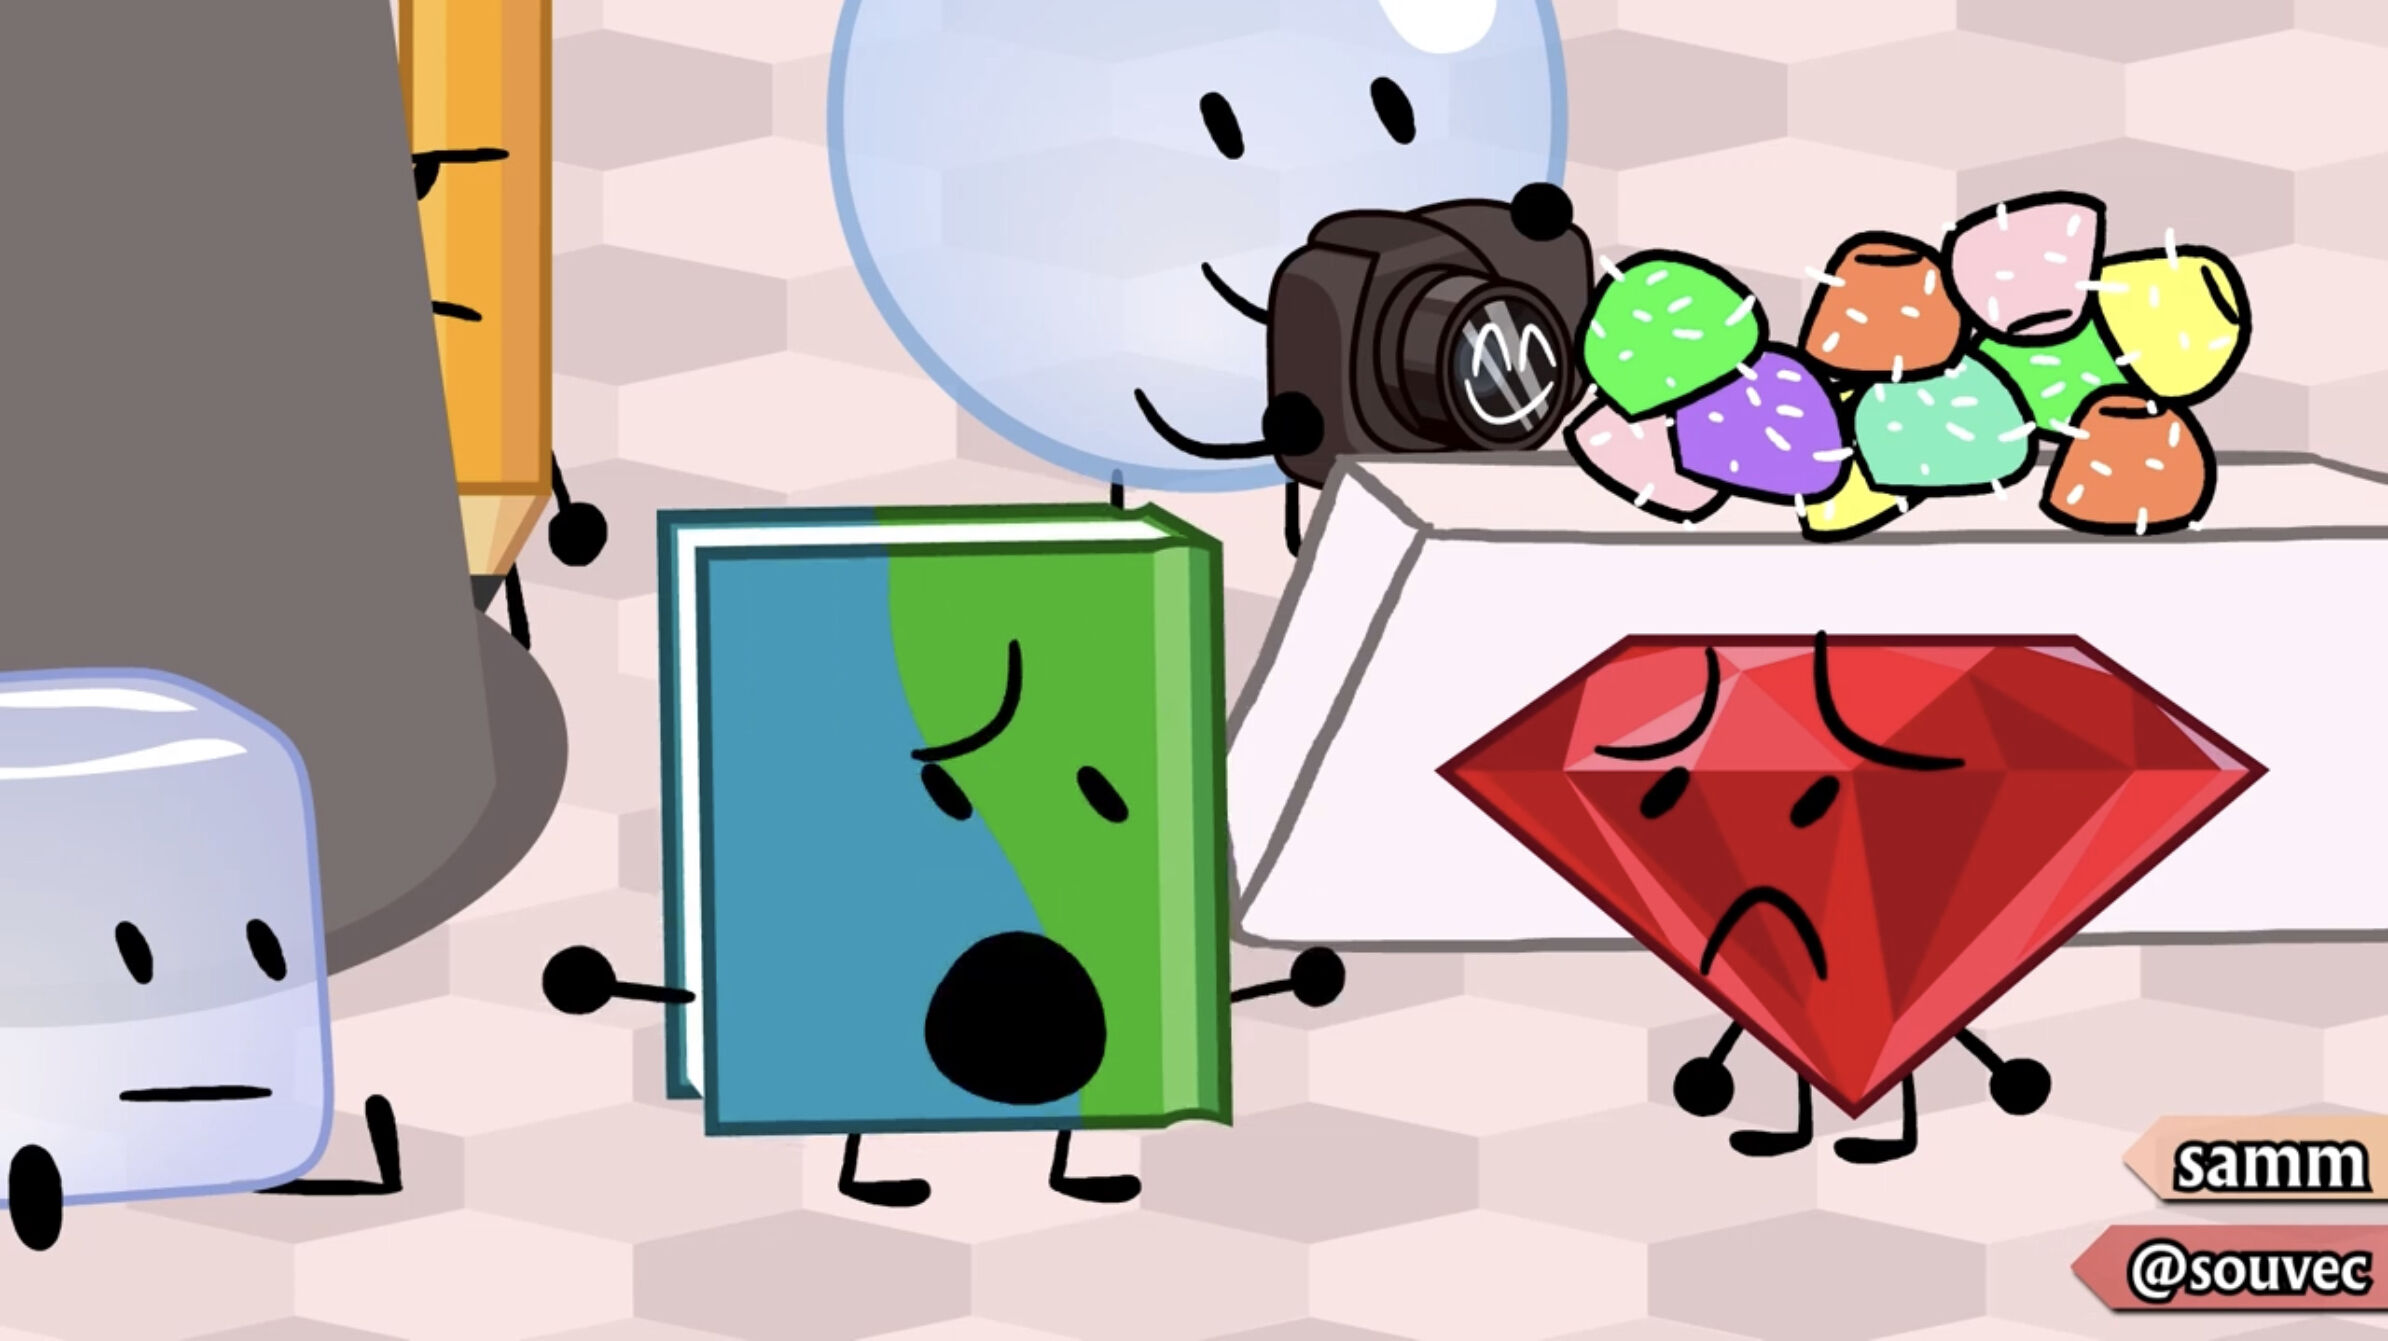 I made a scene from BFB 1O in the BFDI-IDFB style. Put a BFB+